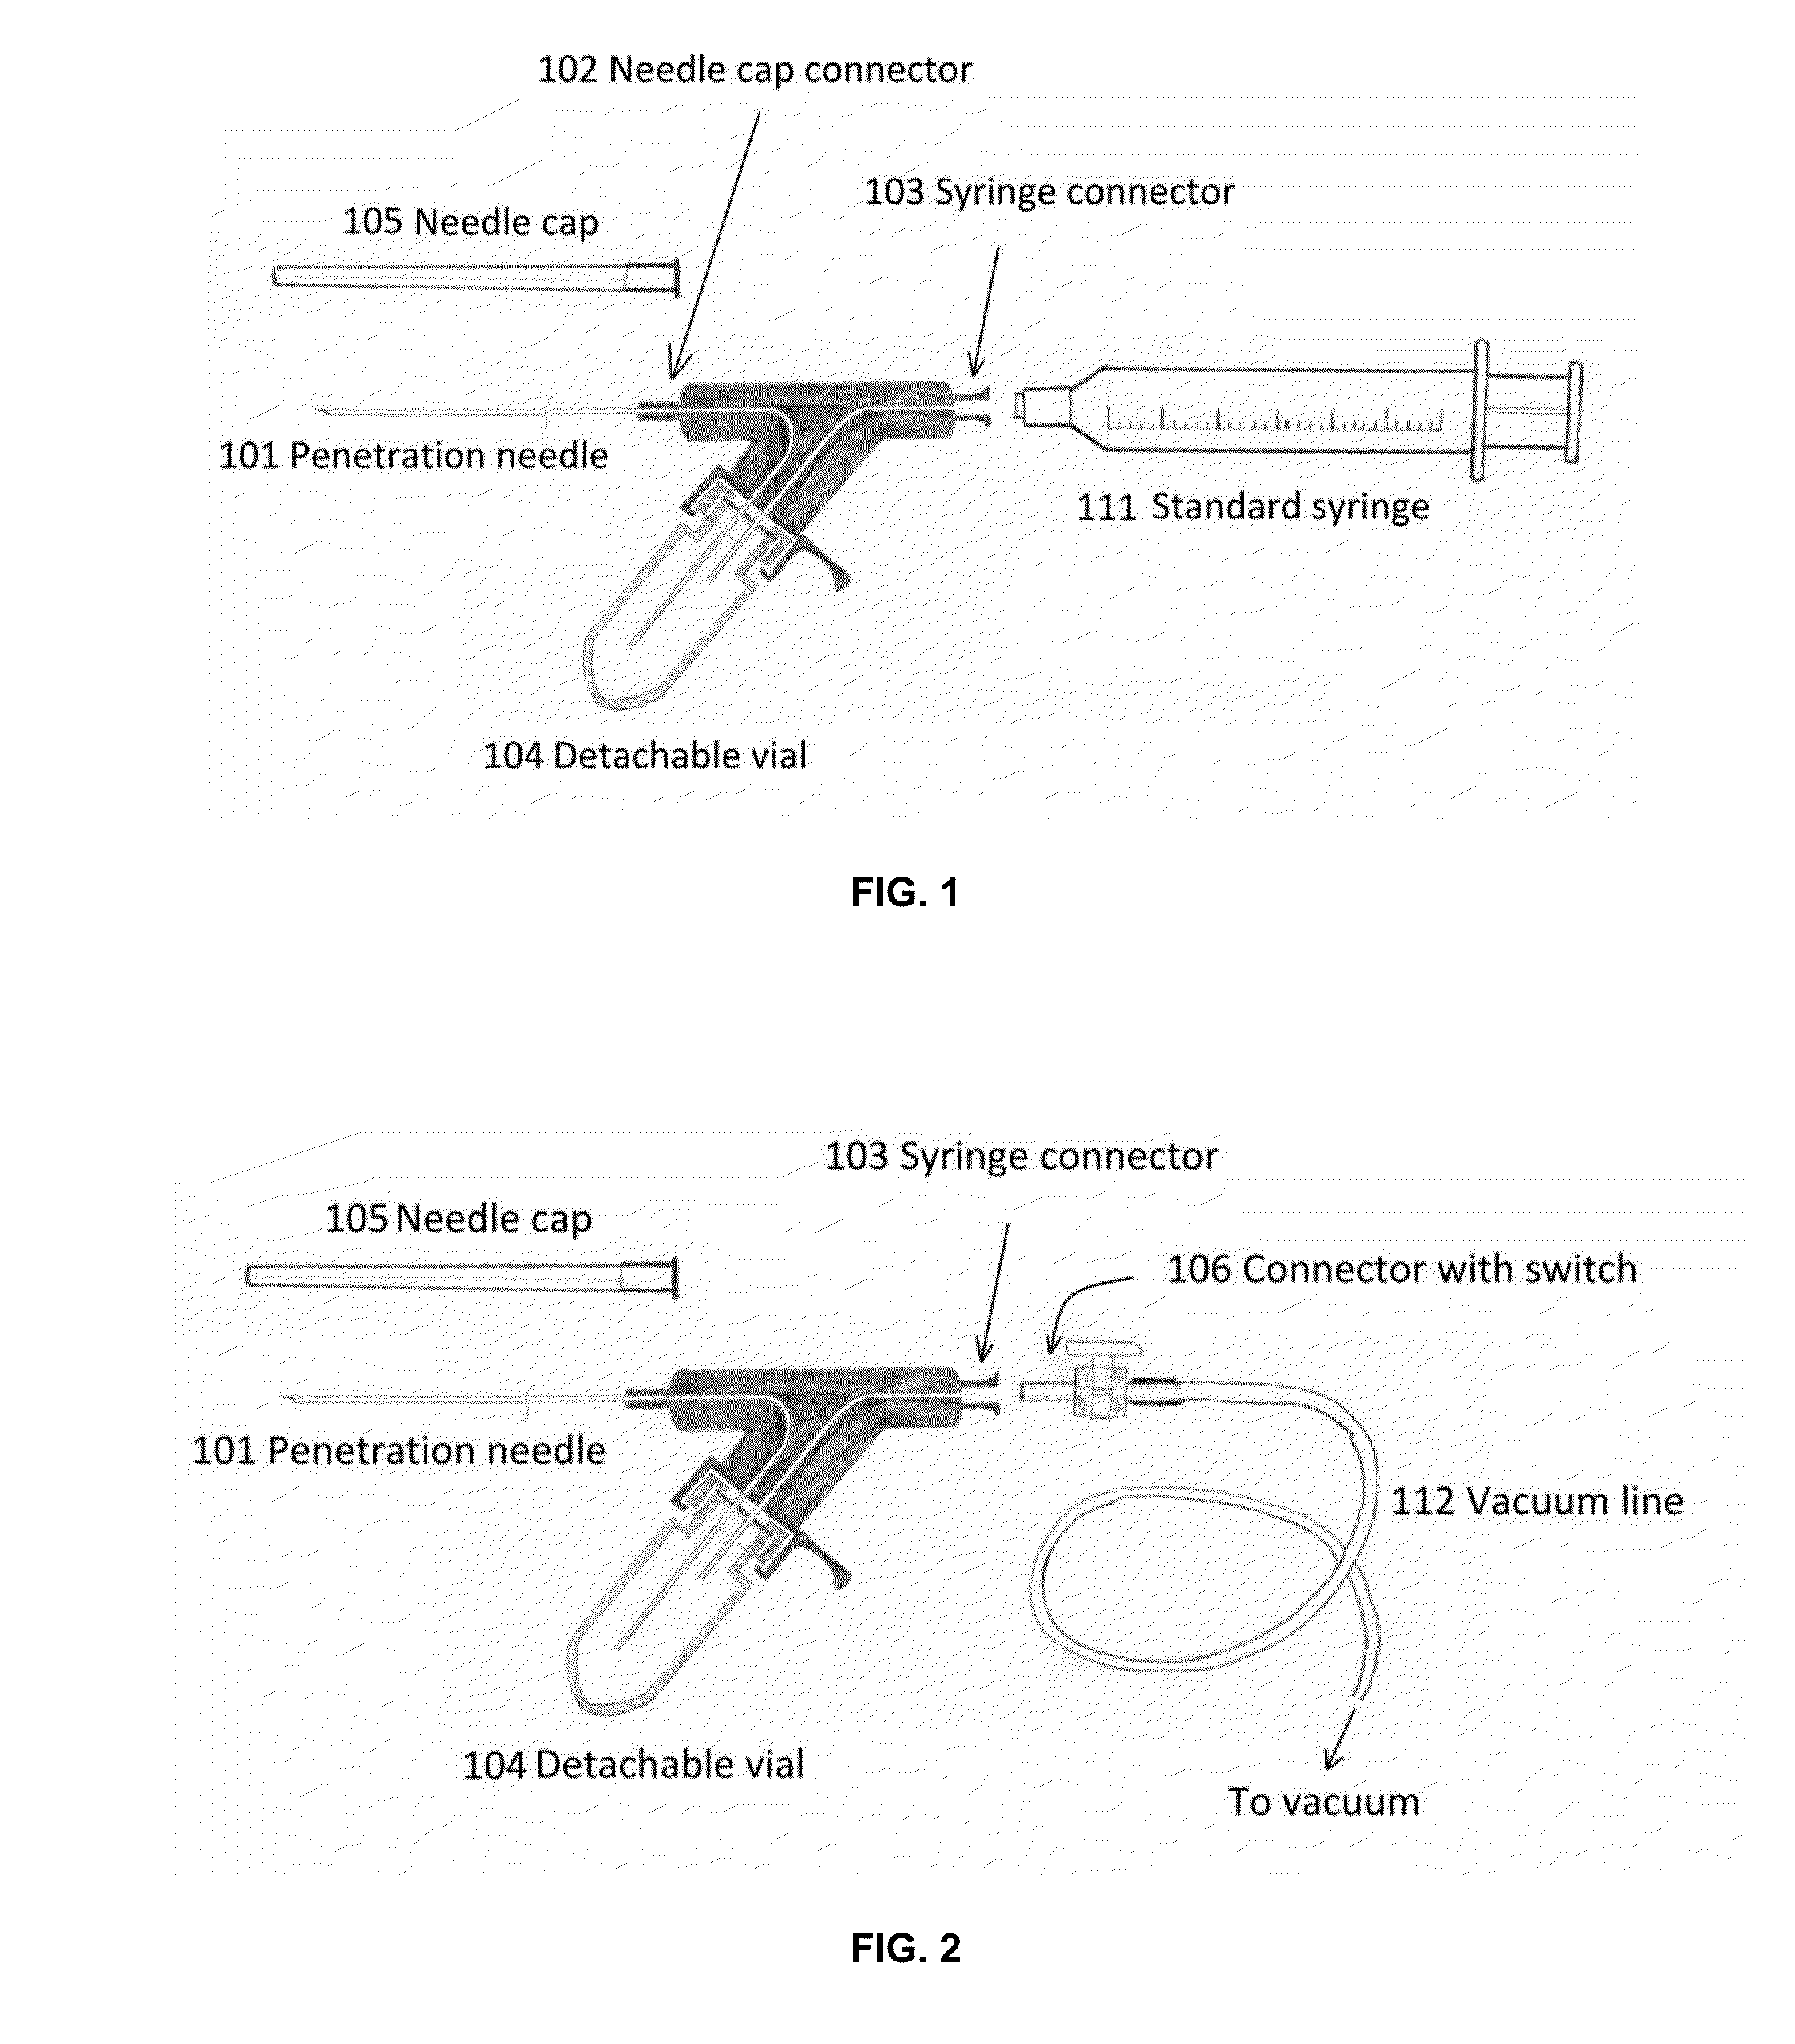 Aspiration and biopsy needle apparatus and devices and applications thereof